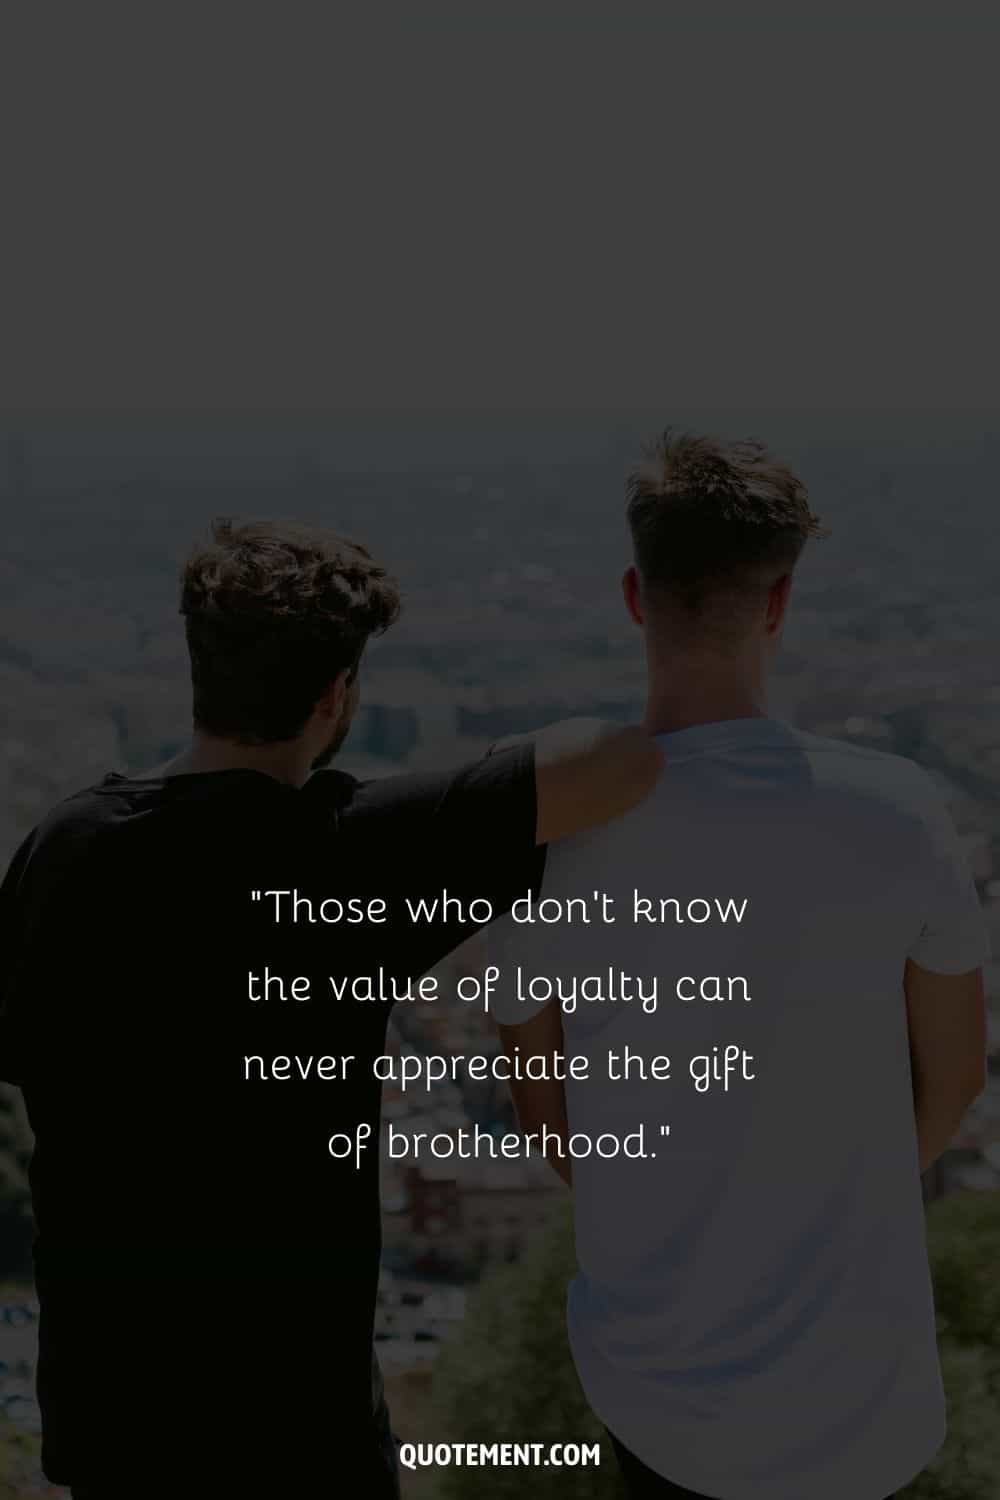 “Those who don’t know the value of loyalty can never appreciate the gift of brotherhood.” — Unknown